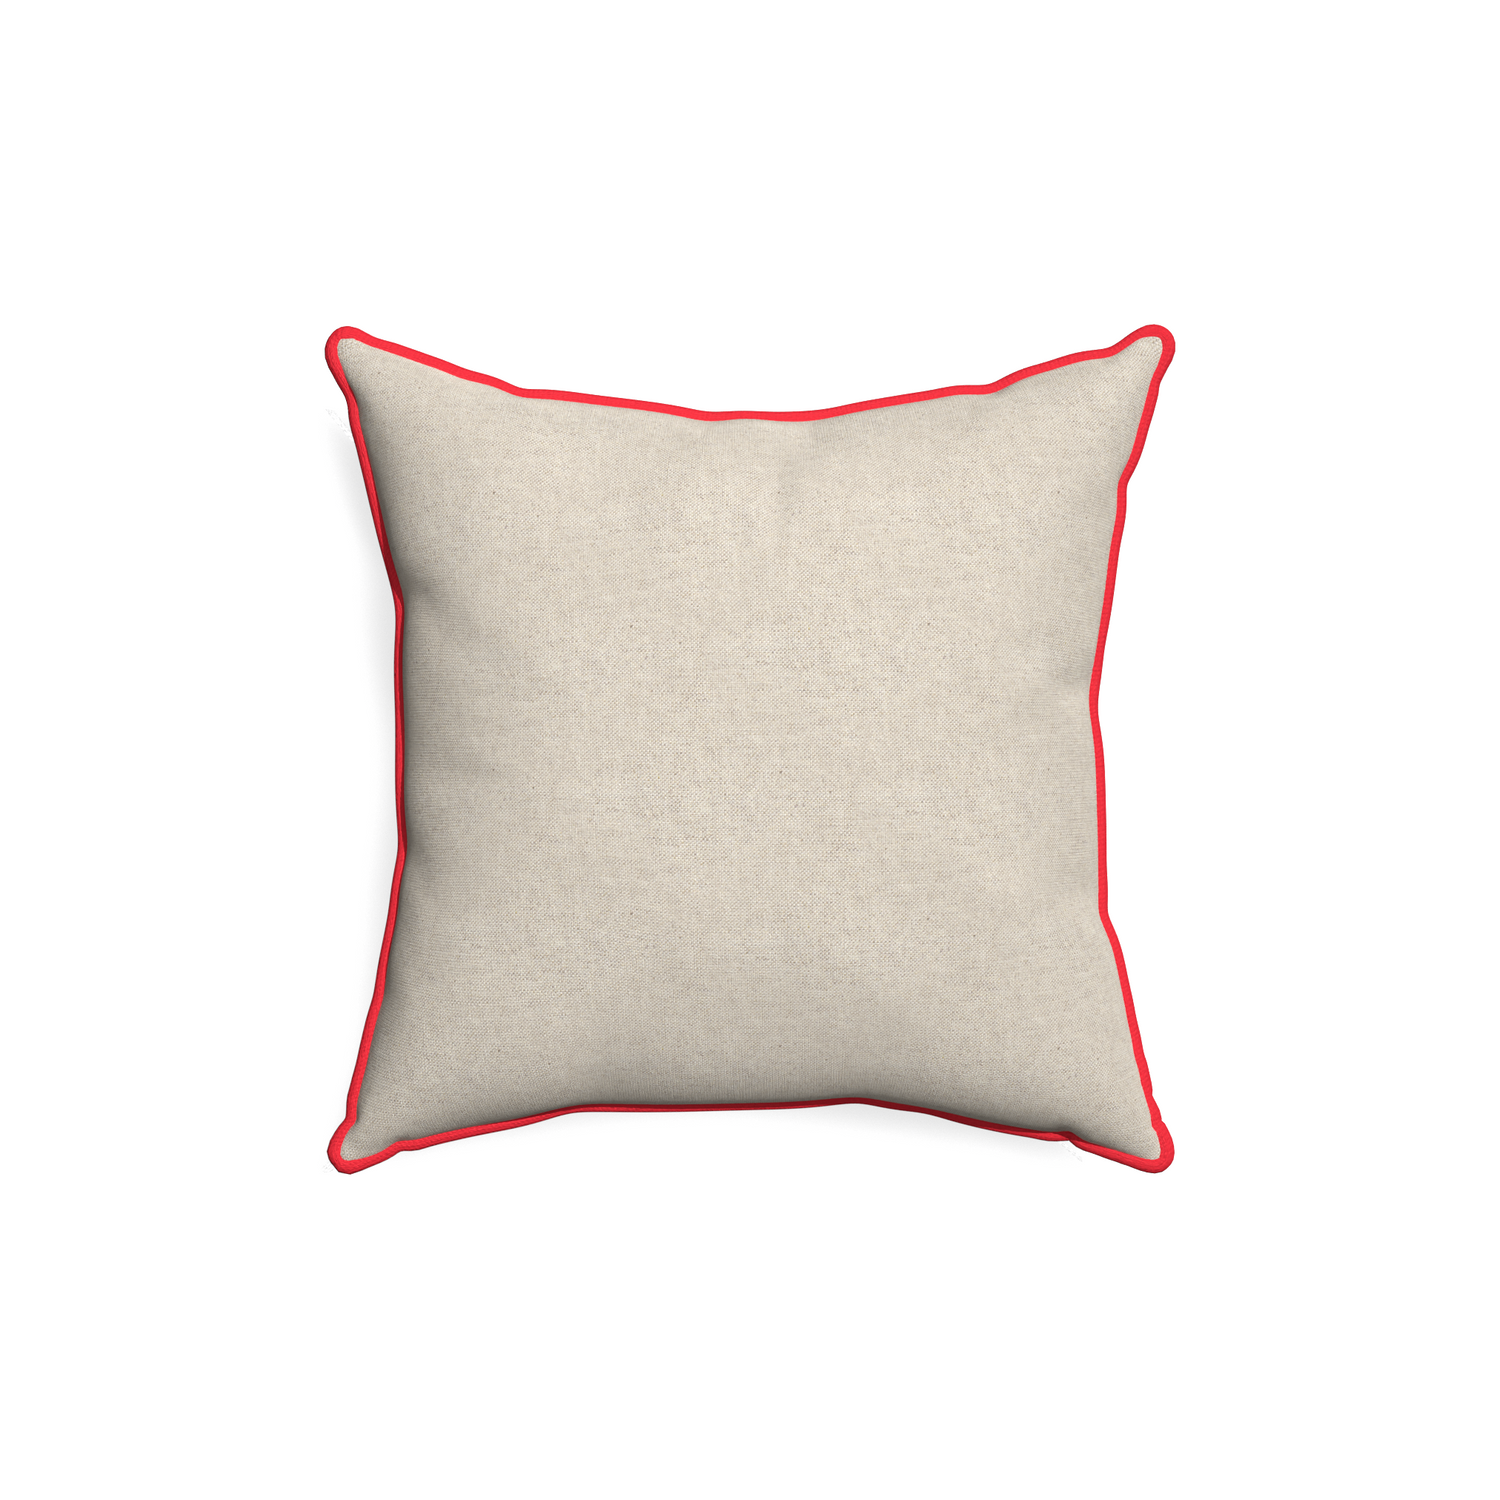 18-square oat custom pillow with cherry piping on white background